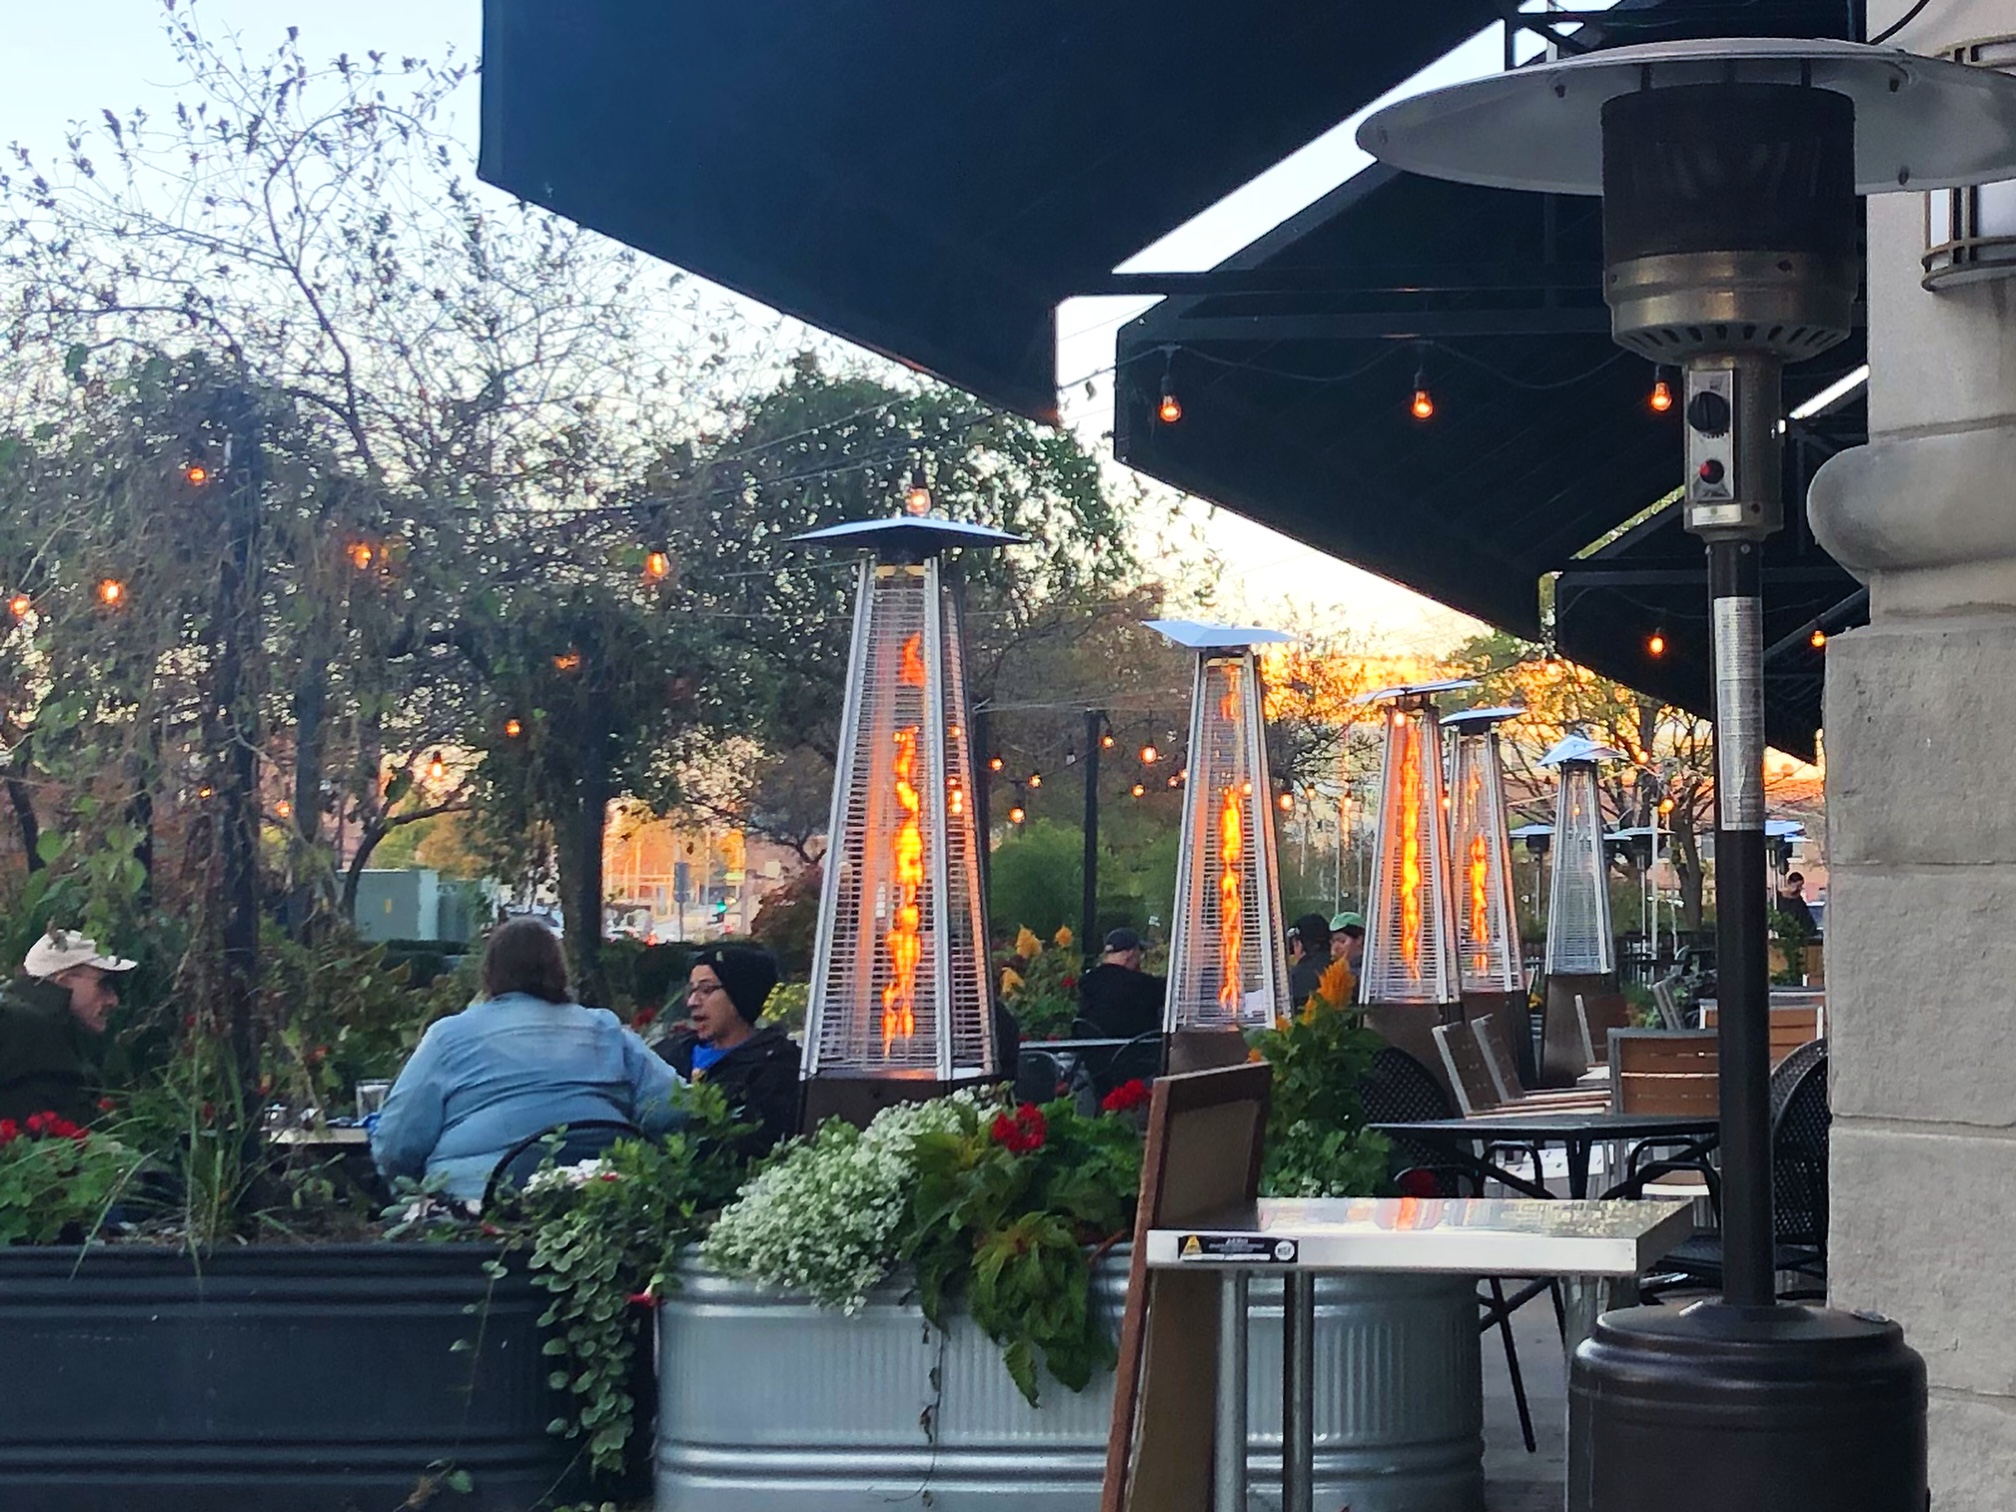 Outside of Big Grove Tavern, there are tables set up spaced apart and a row of lighted flame heaters. Photo by Alyssa Buckley.